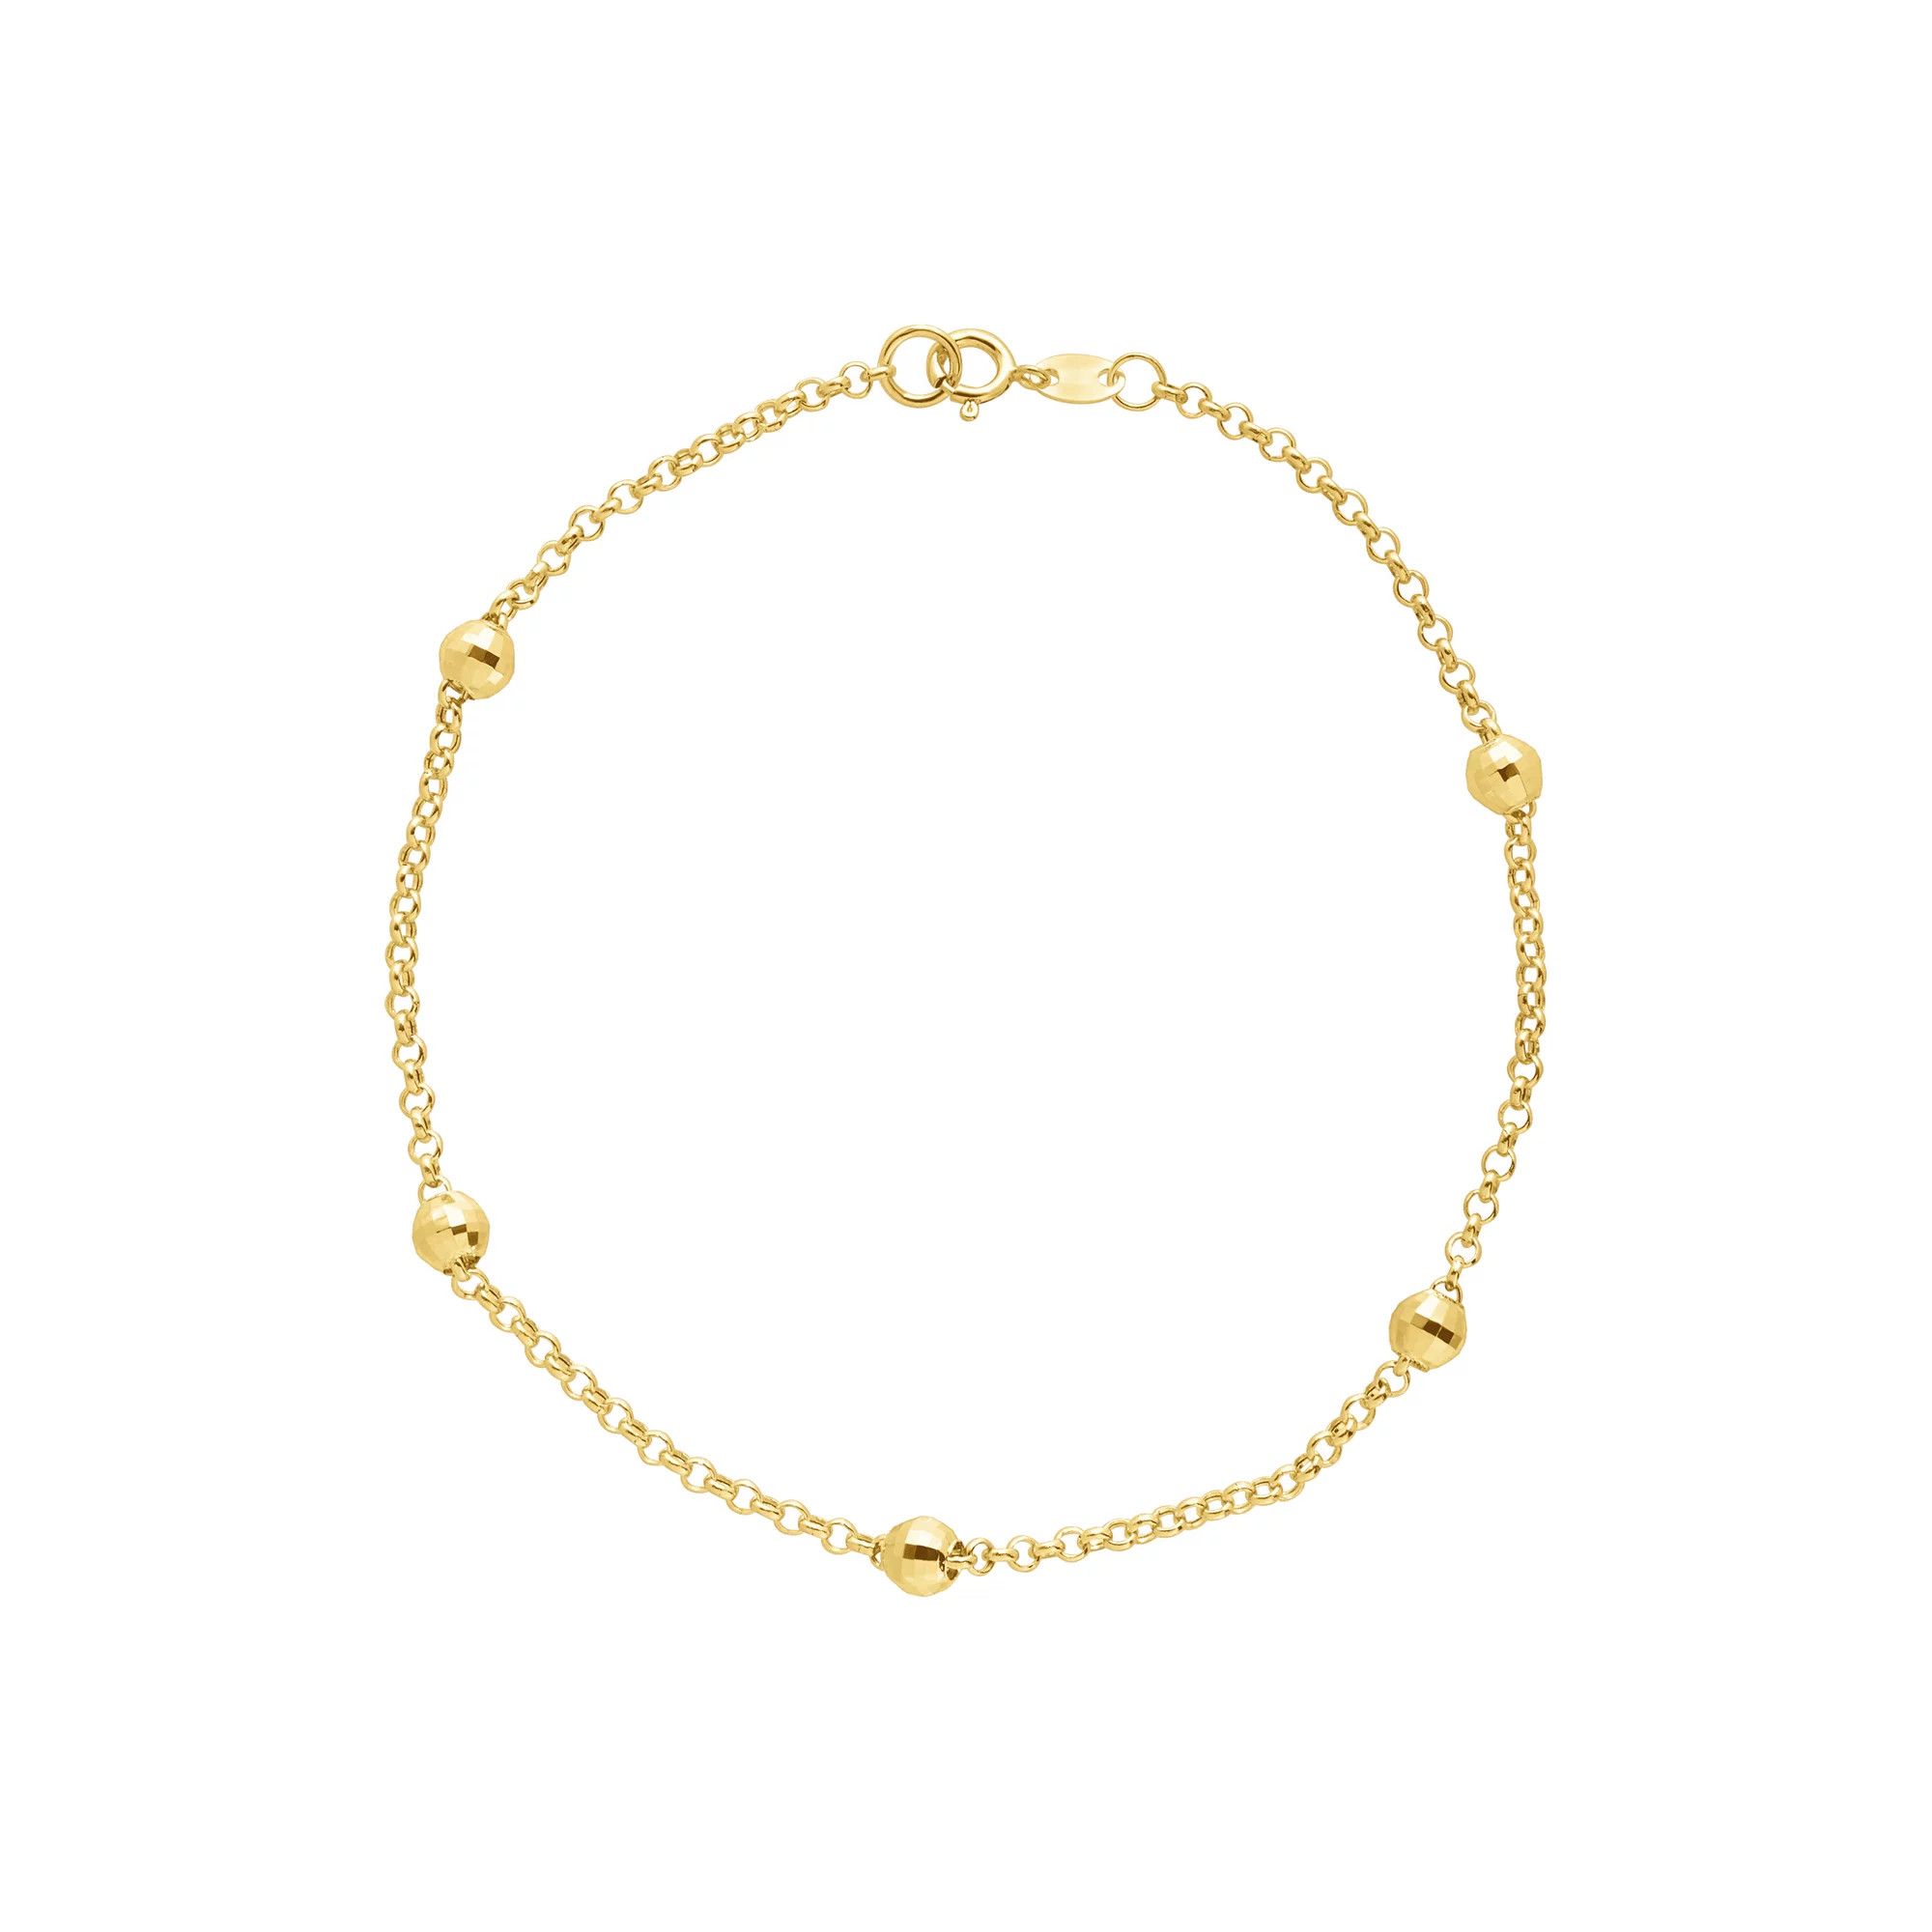 Beaded Shimmer Rolo Chain Bracelet in 10kt Gold, 7 1/2 by 1/8 inches | Walmart (US)